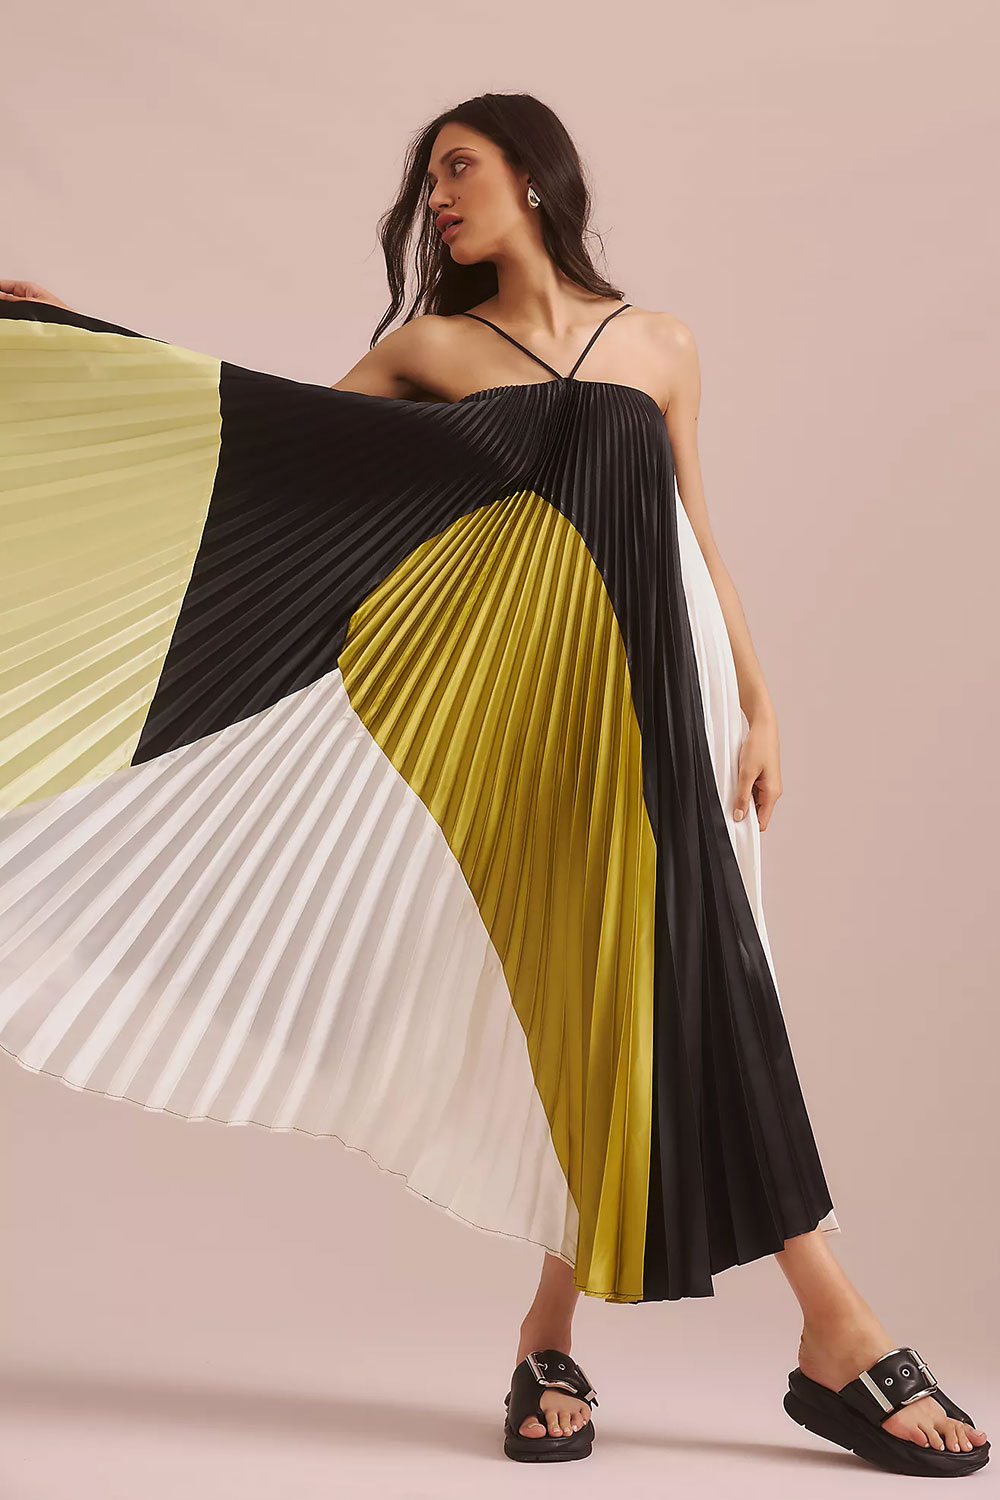 Graphic pleated dress from Anthropologie